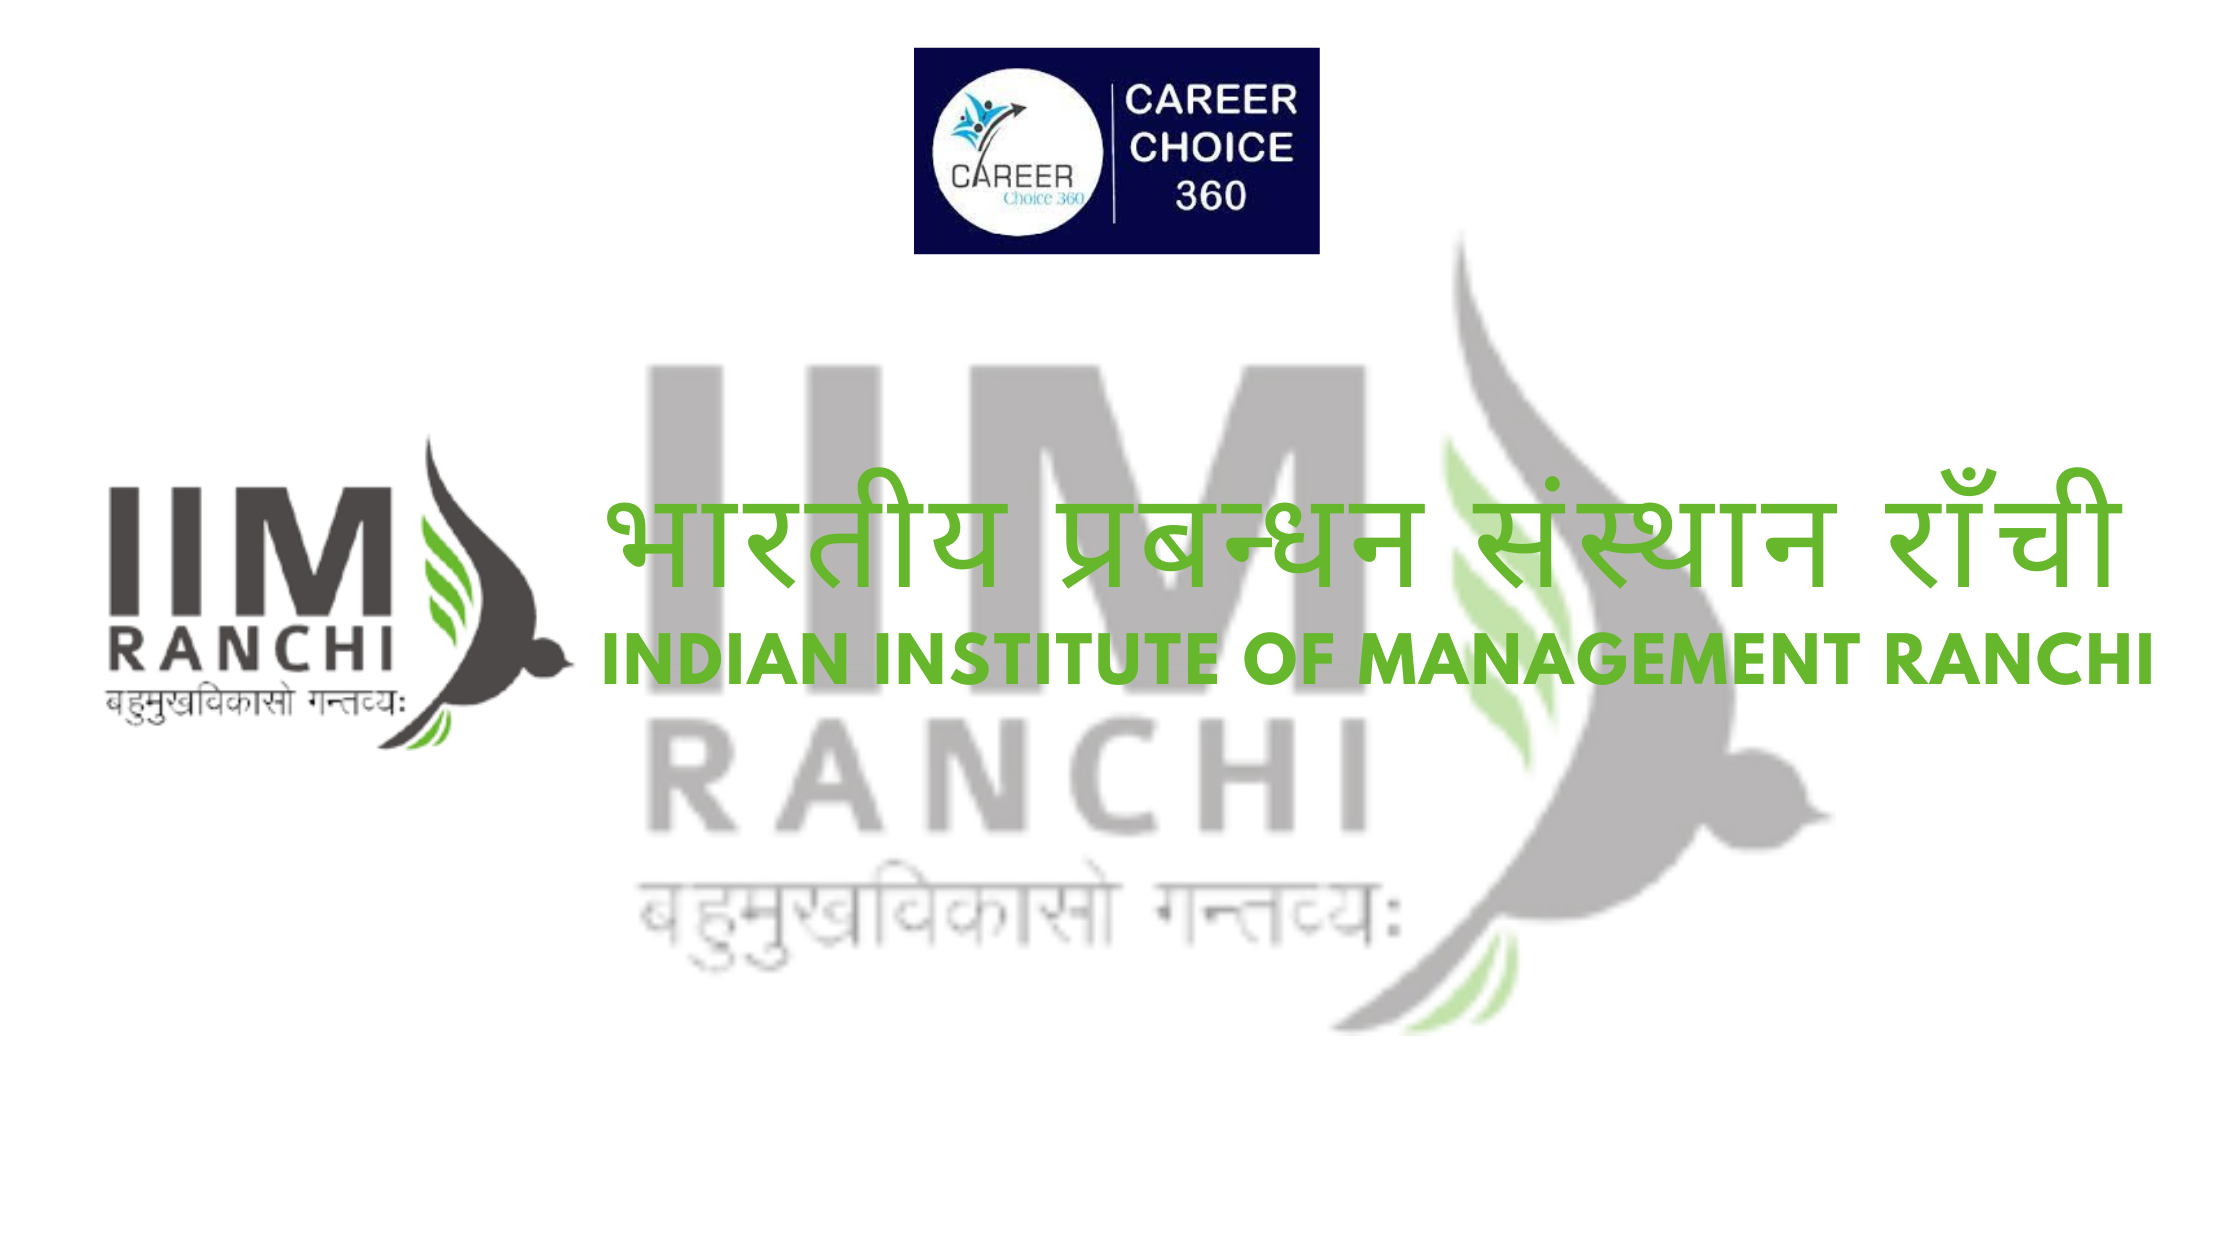 You are currently viewing Indian Institute of Management Ranchi (IIM Ranchi) : Course & Fees, Admission procedure, Rankings, and Placements